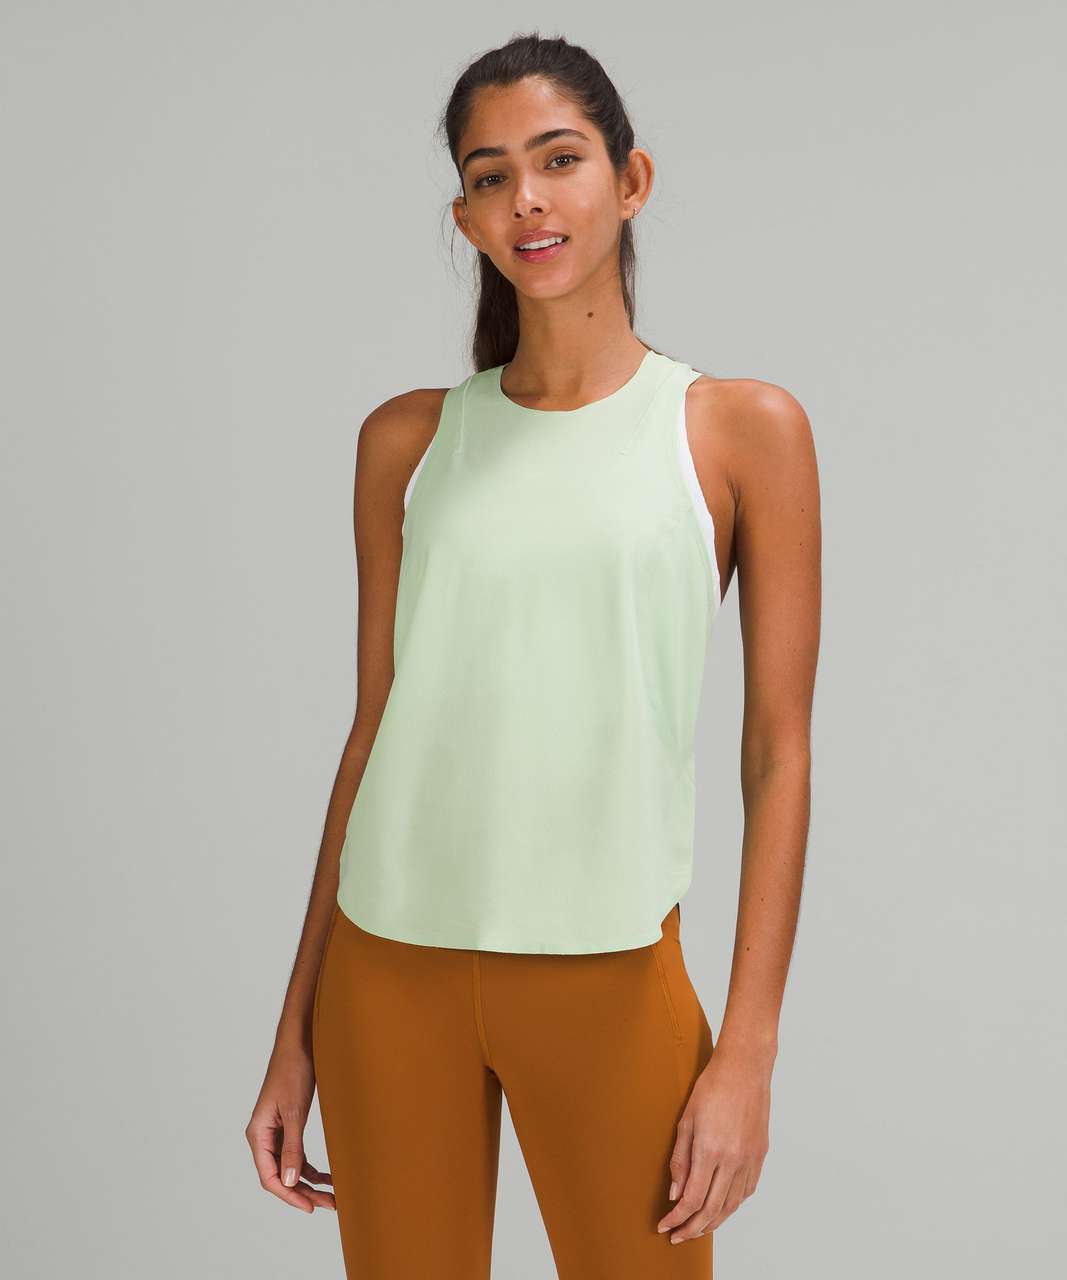 lululemon athletica, Tops, Lululemon Hold Tight Tank Top In Creamy Mint  Size 6